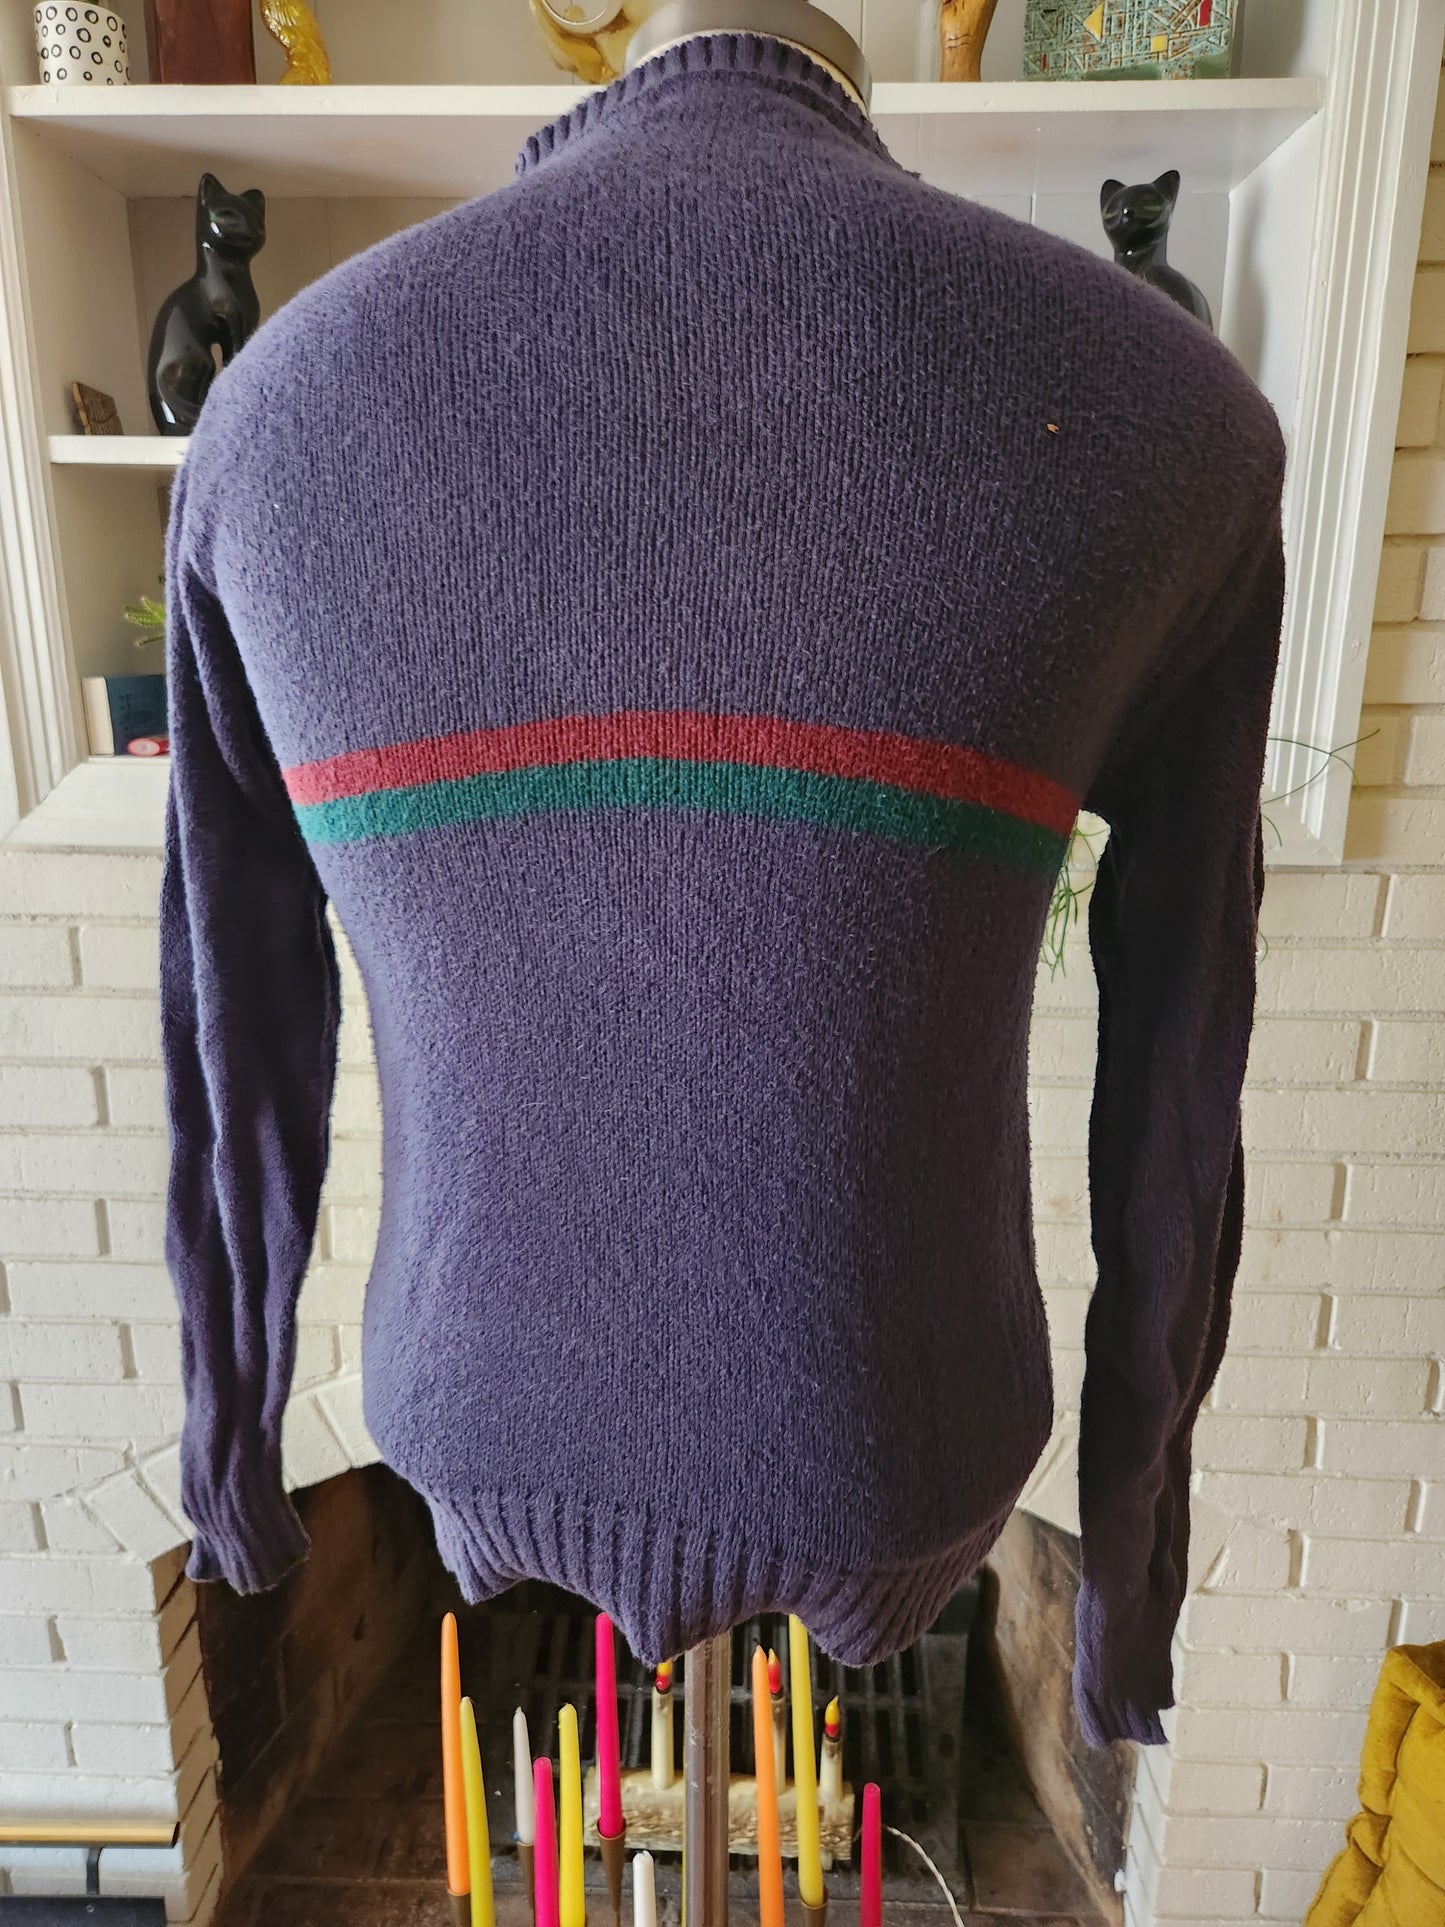 Vintage Sweater by Christian Dior Actif